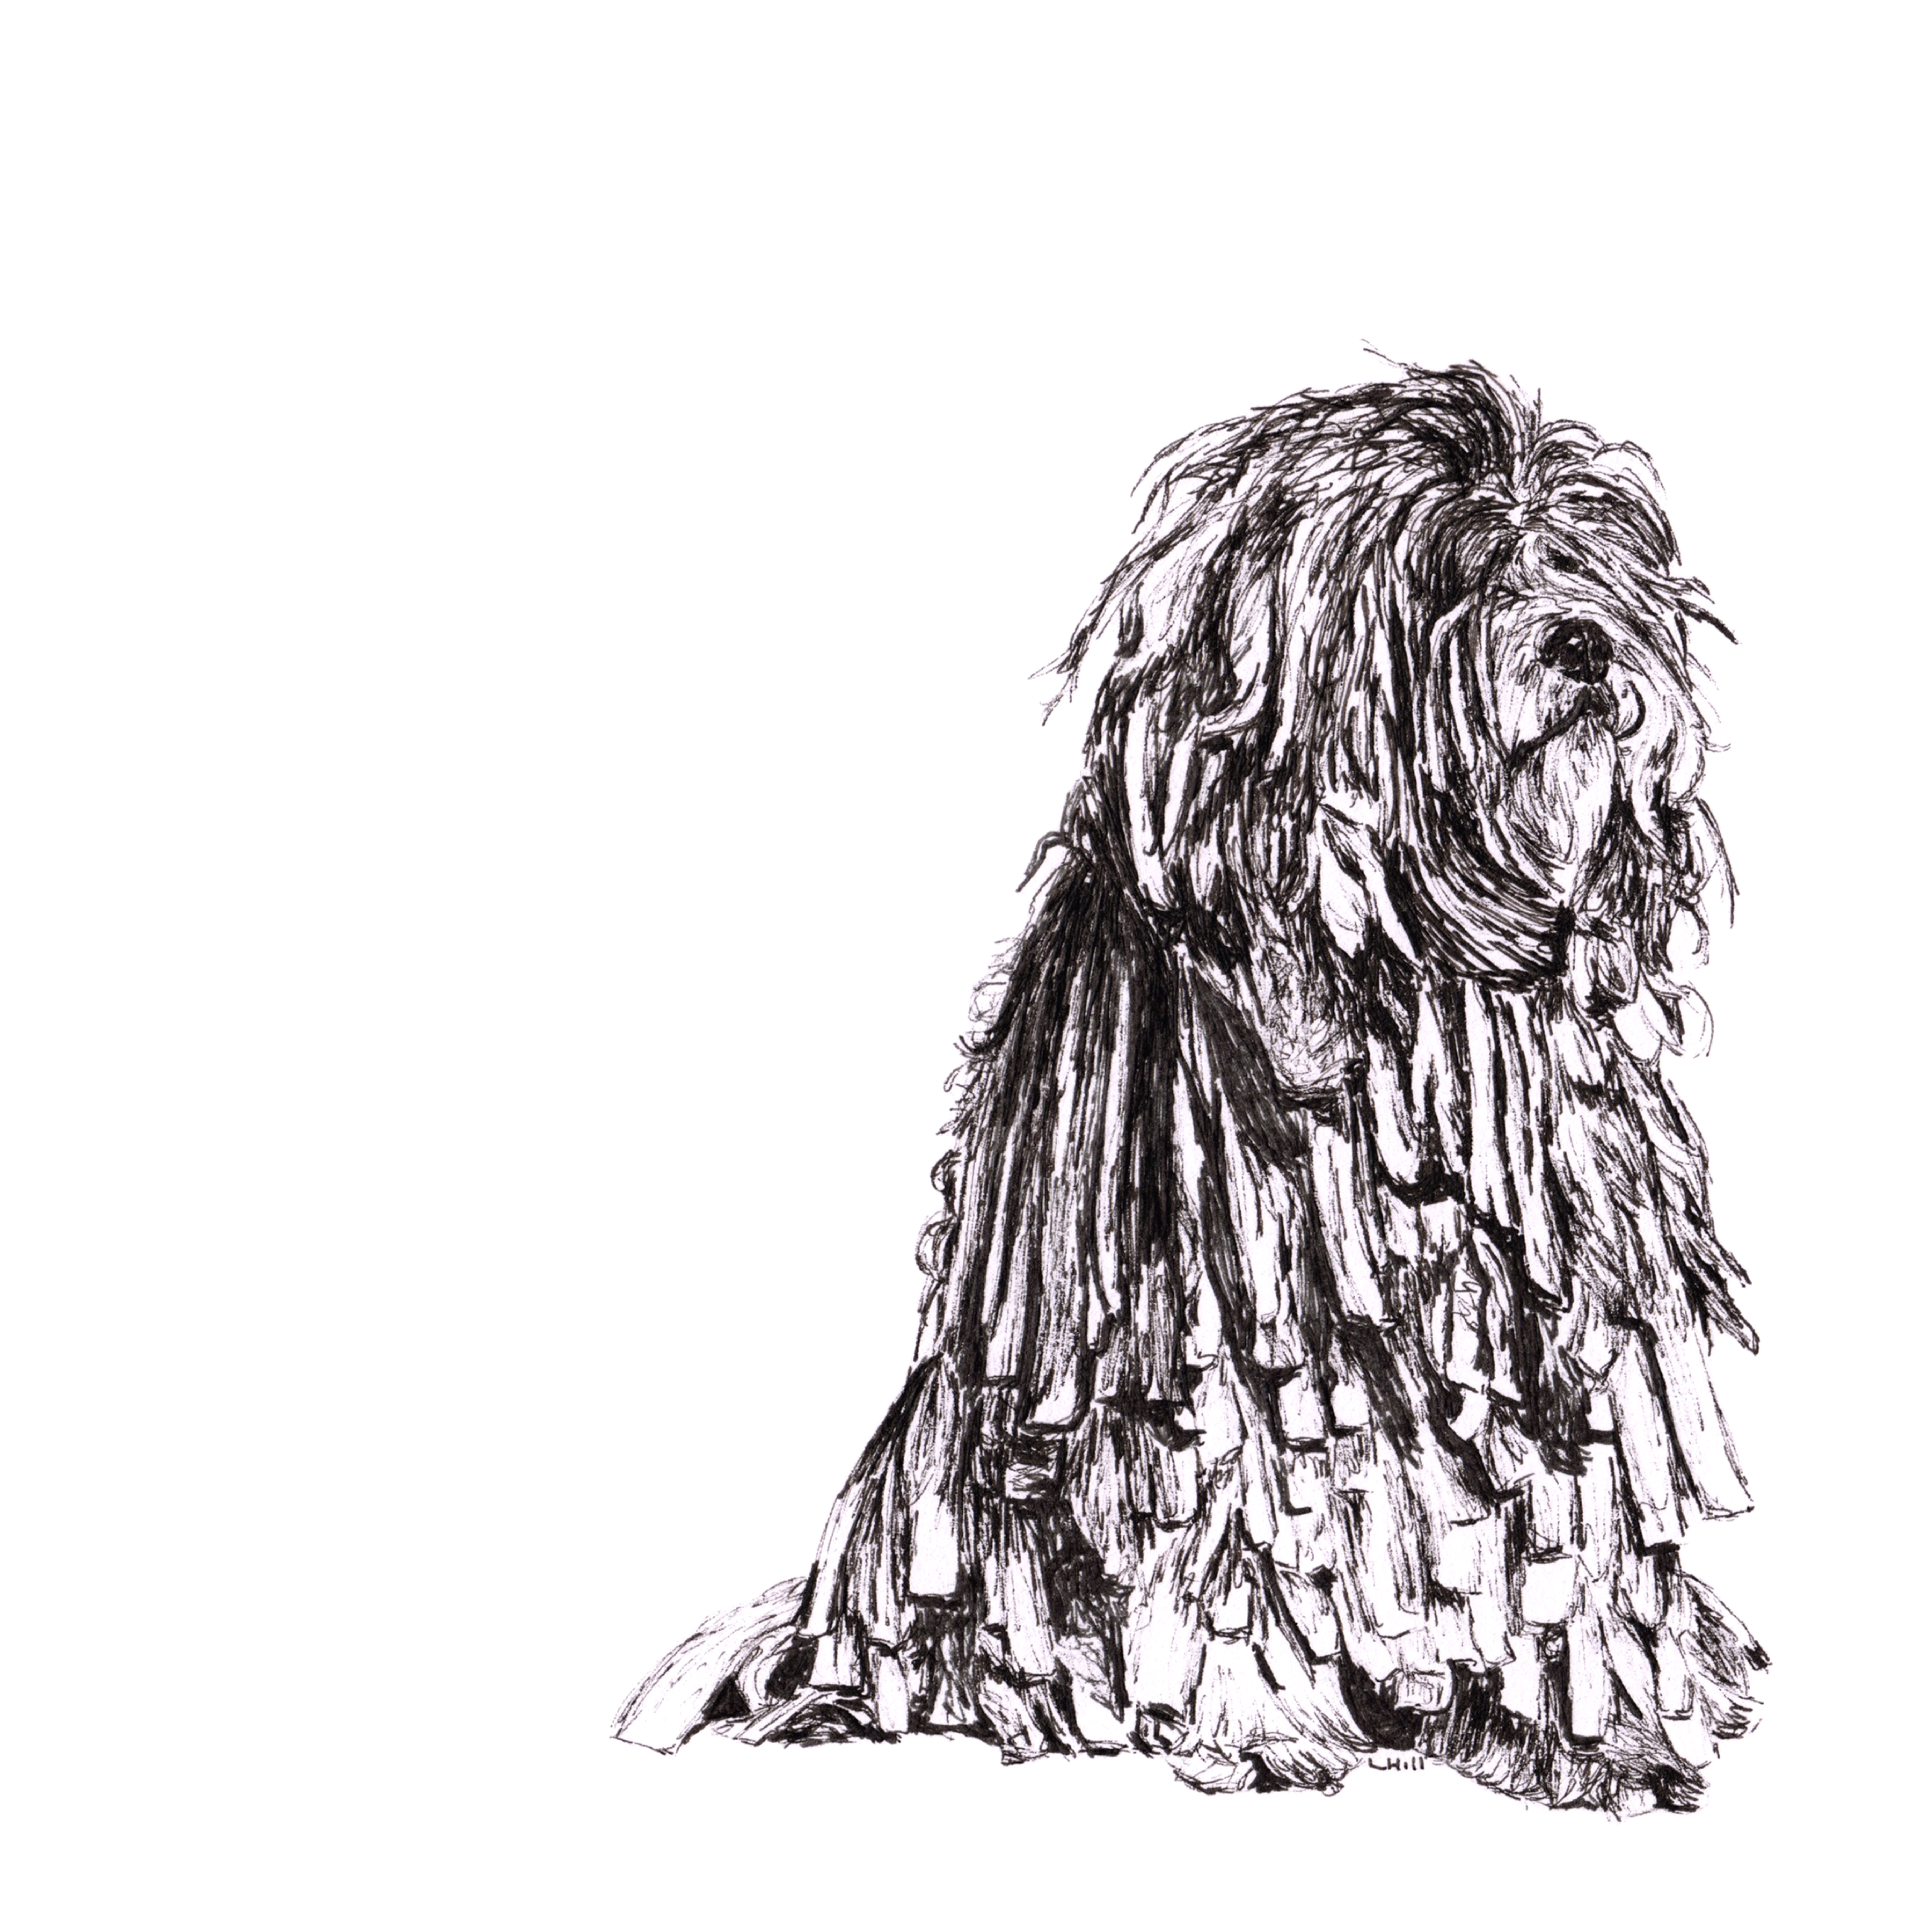 Bergamasco pen and ink illustration by Louisa Hill